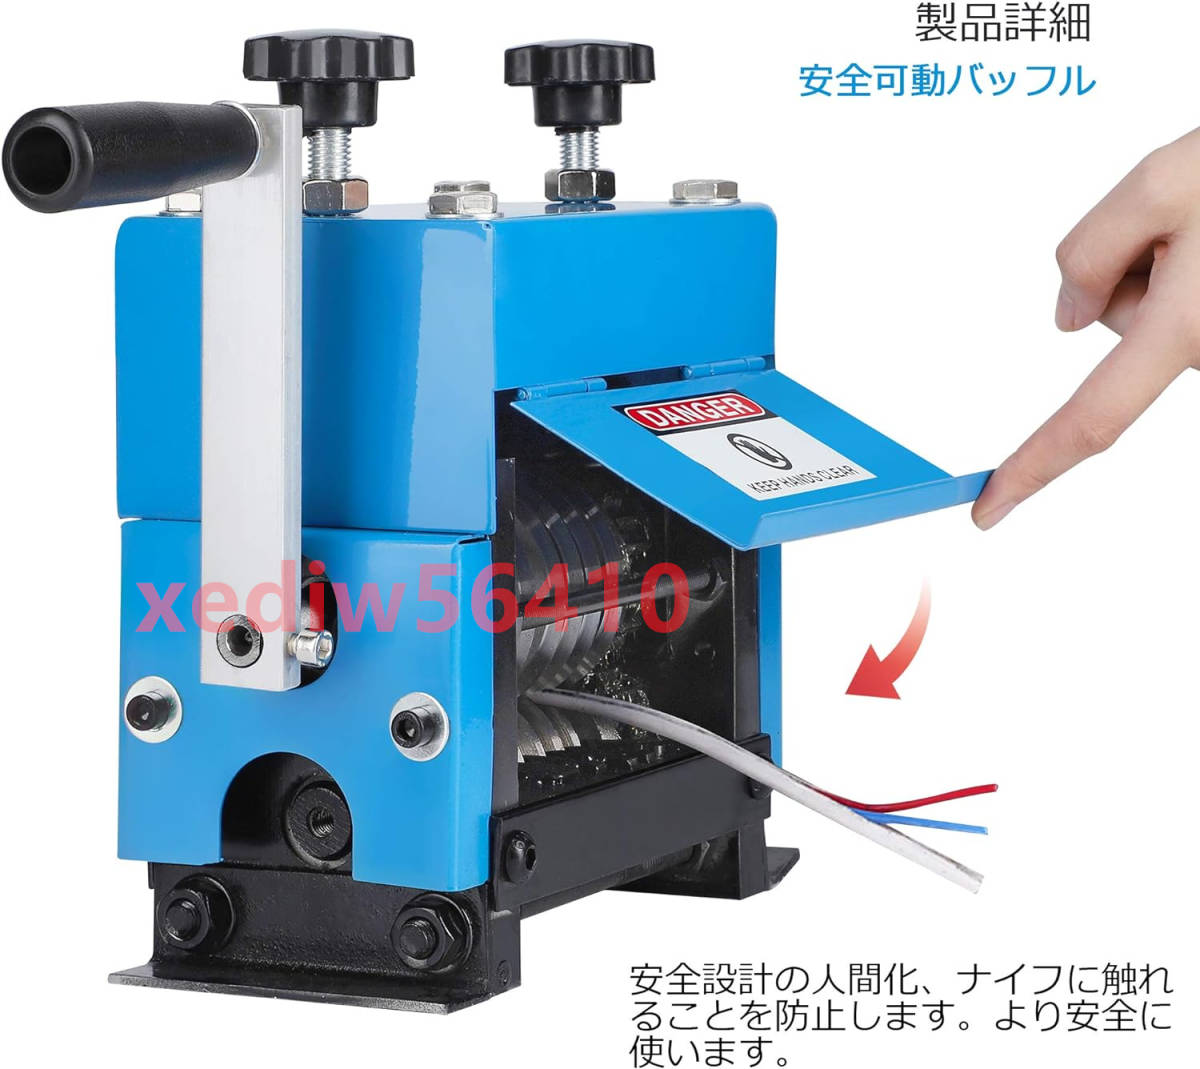  manual wire stripper cable -stroke ripper cable peeling line machine electric wire leather peeling . machine cable peeling machine electric wire. coating to peeled off 1.5-20mm business use industry for 